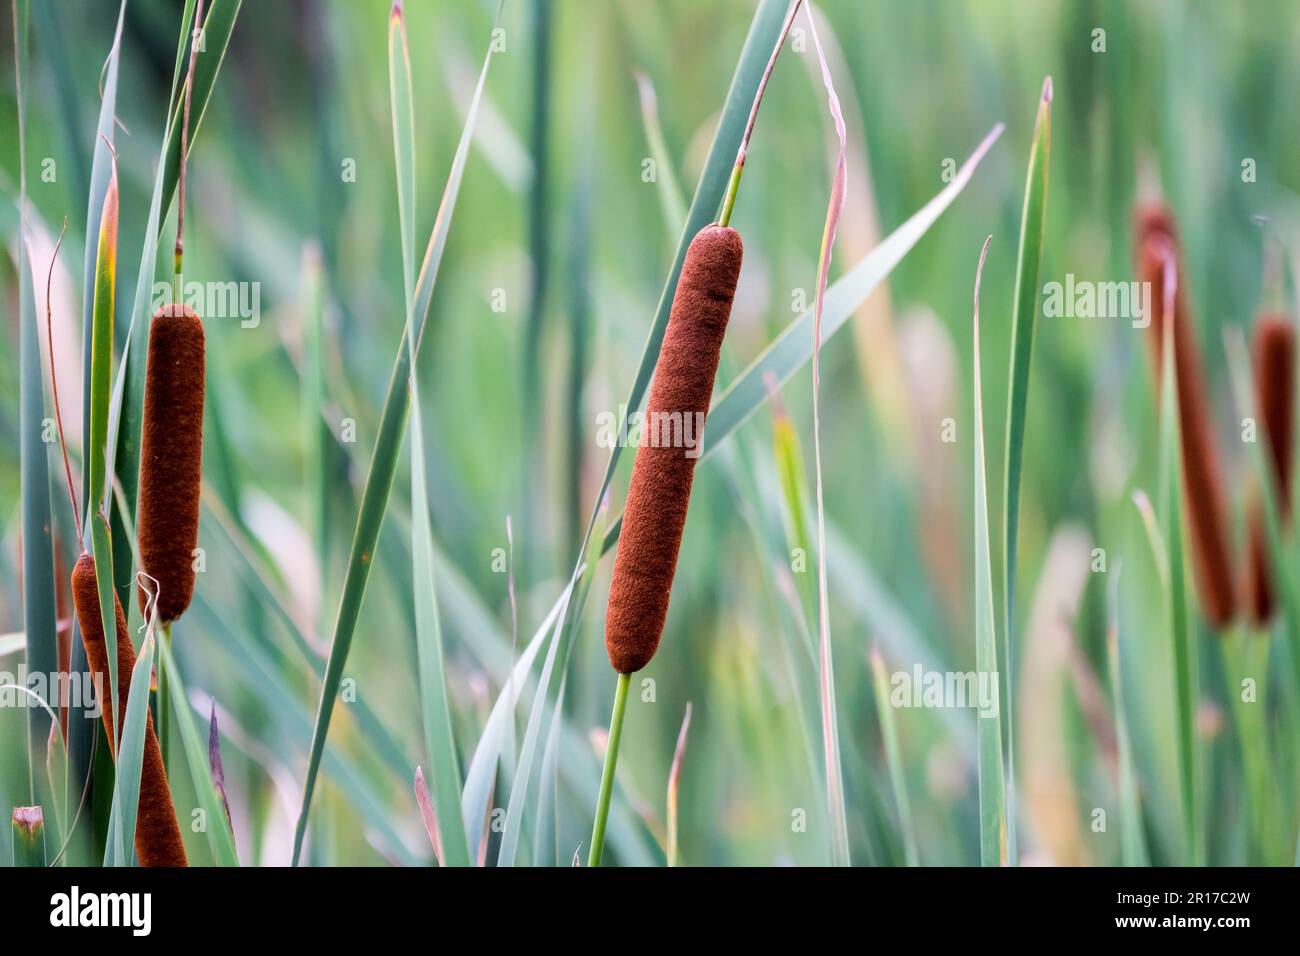 Typha capensis, bulrush, matjiesriet velvety brown flowers on stalk or inflorescence closeup against green leaves in South Africa nature Stock Photo